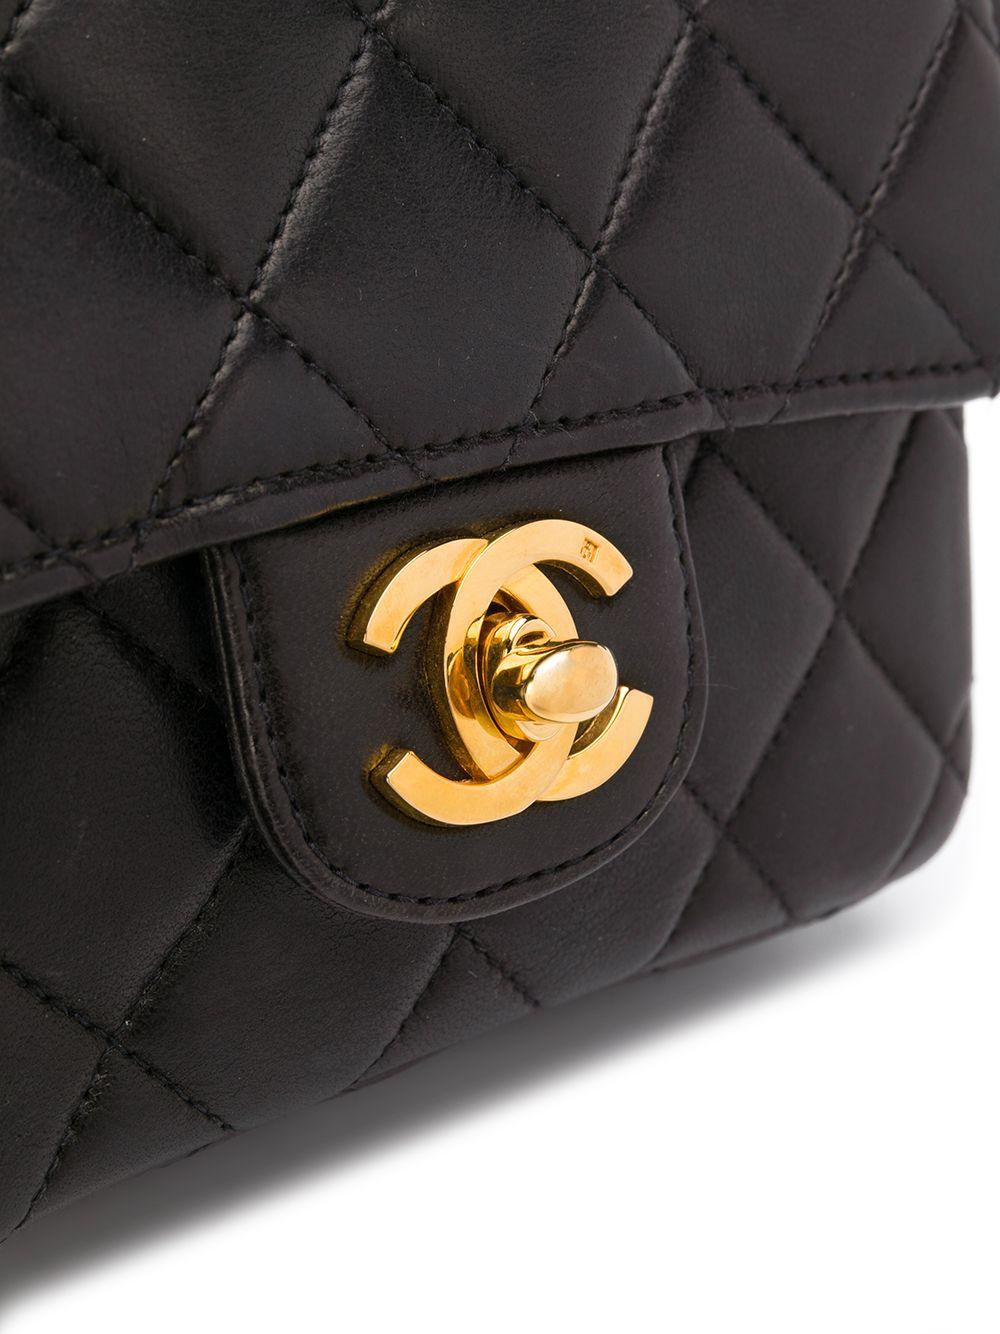 Chanel Black Leather Mini Kelly Flap Bag - 2 For Sale on 1stDibs